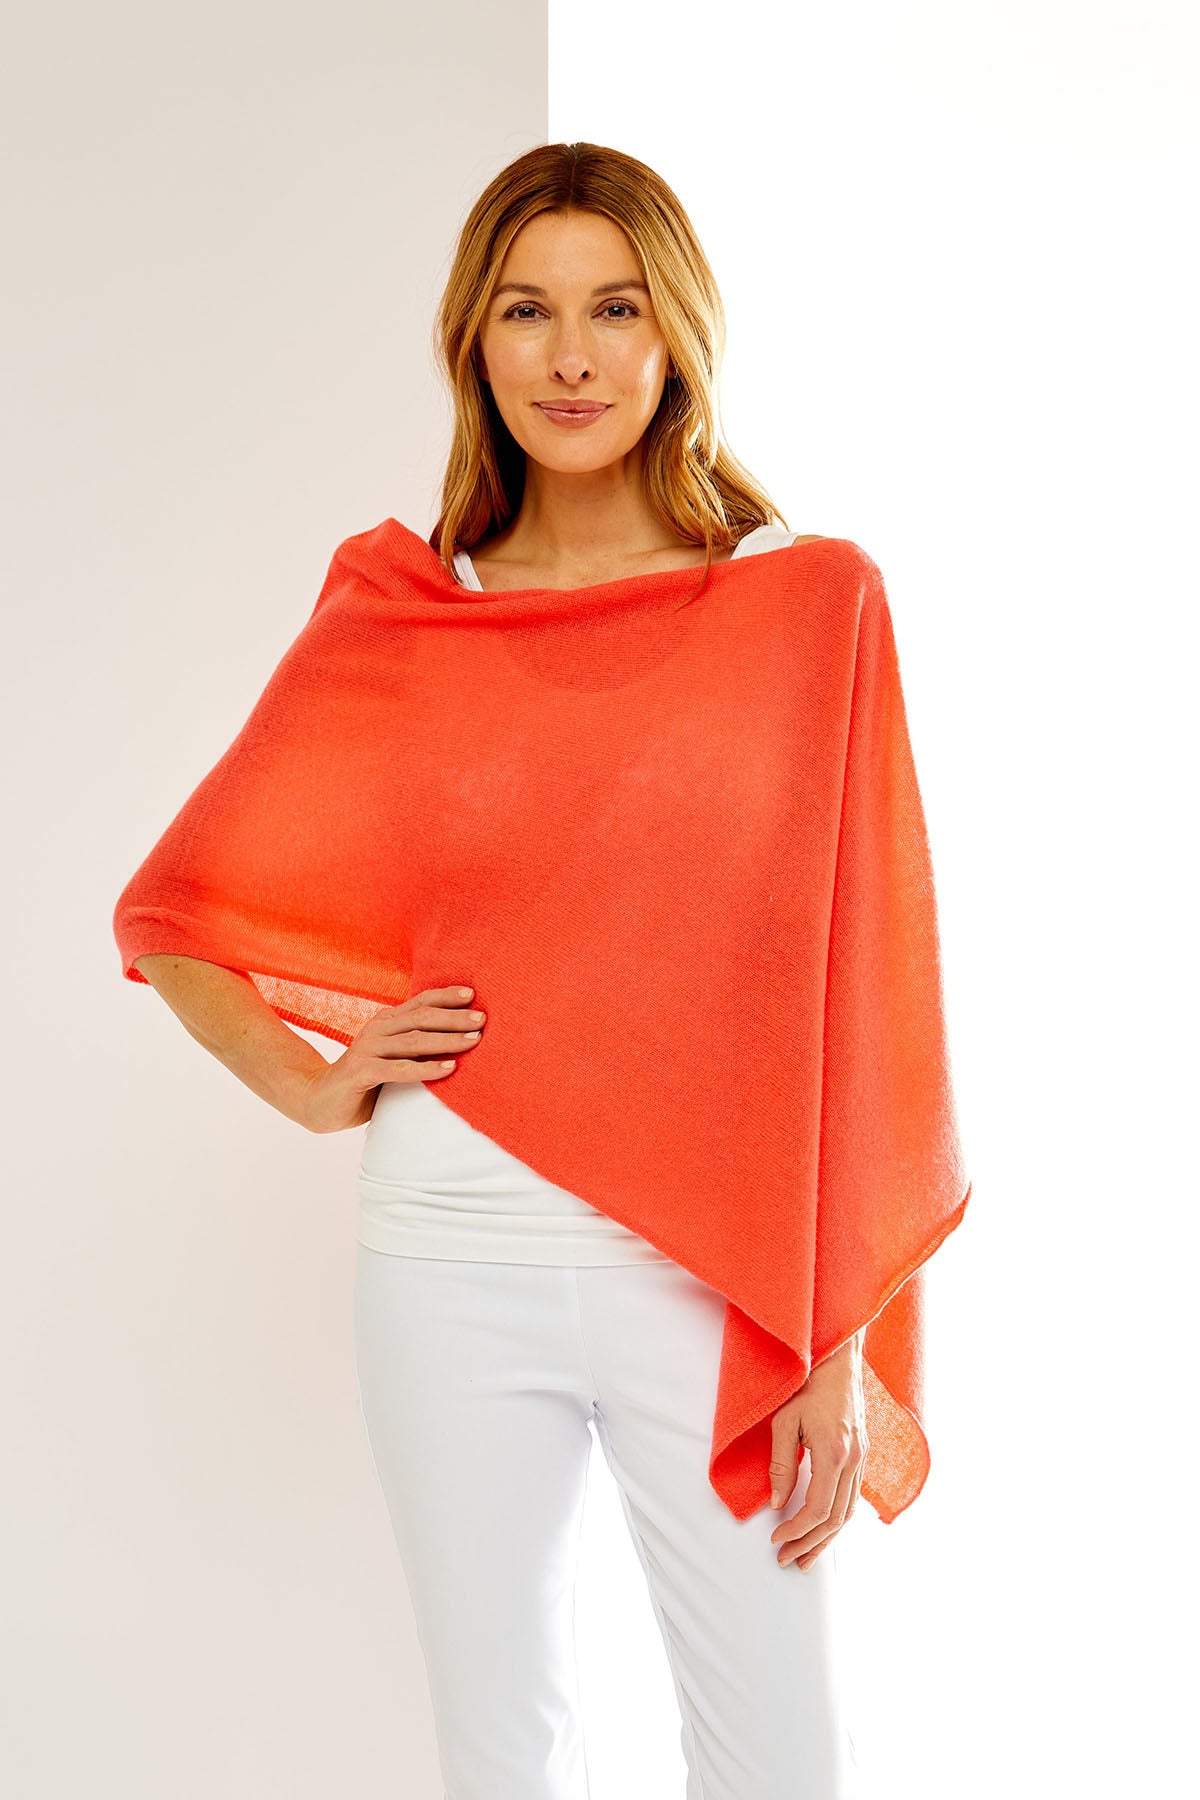 Woman in cashmere poncho